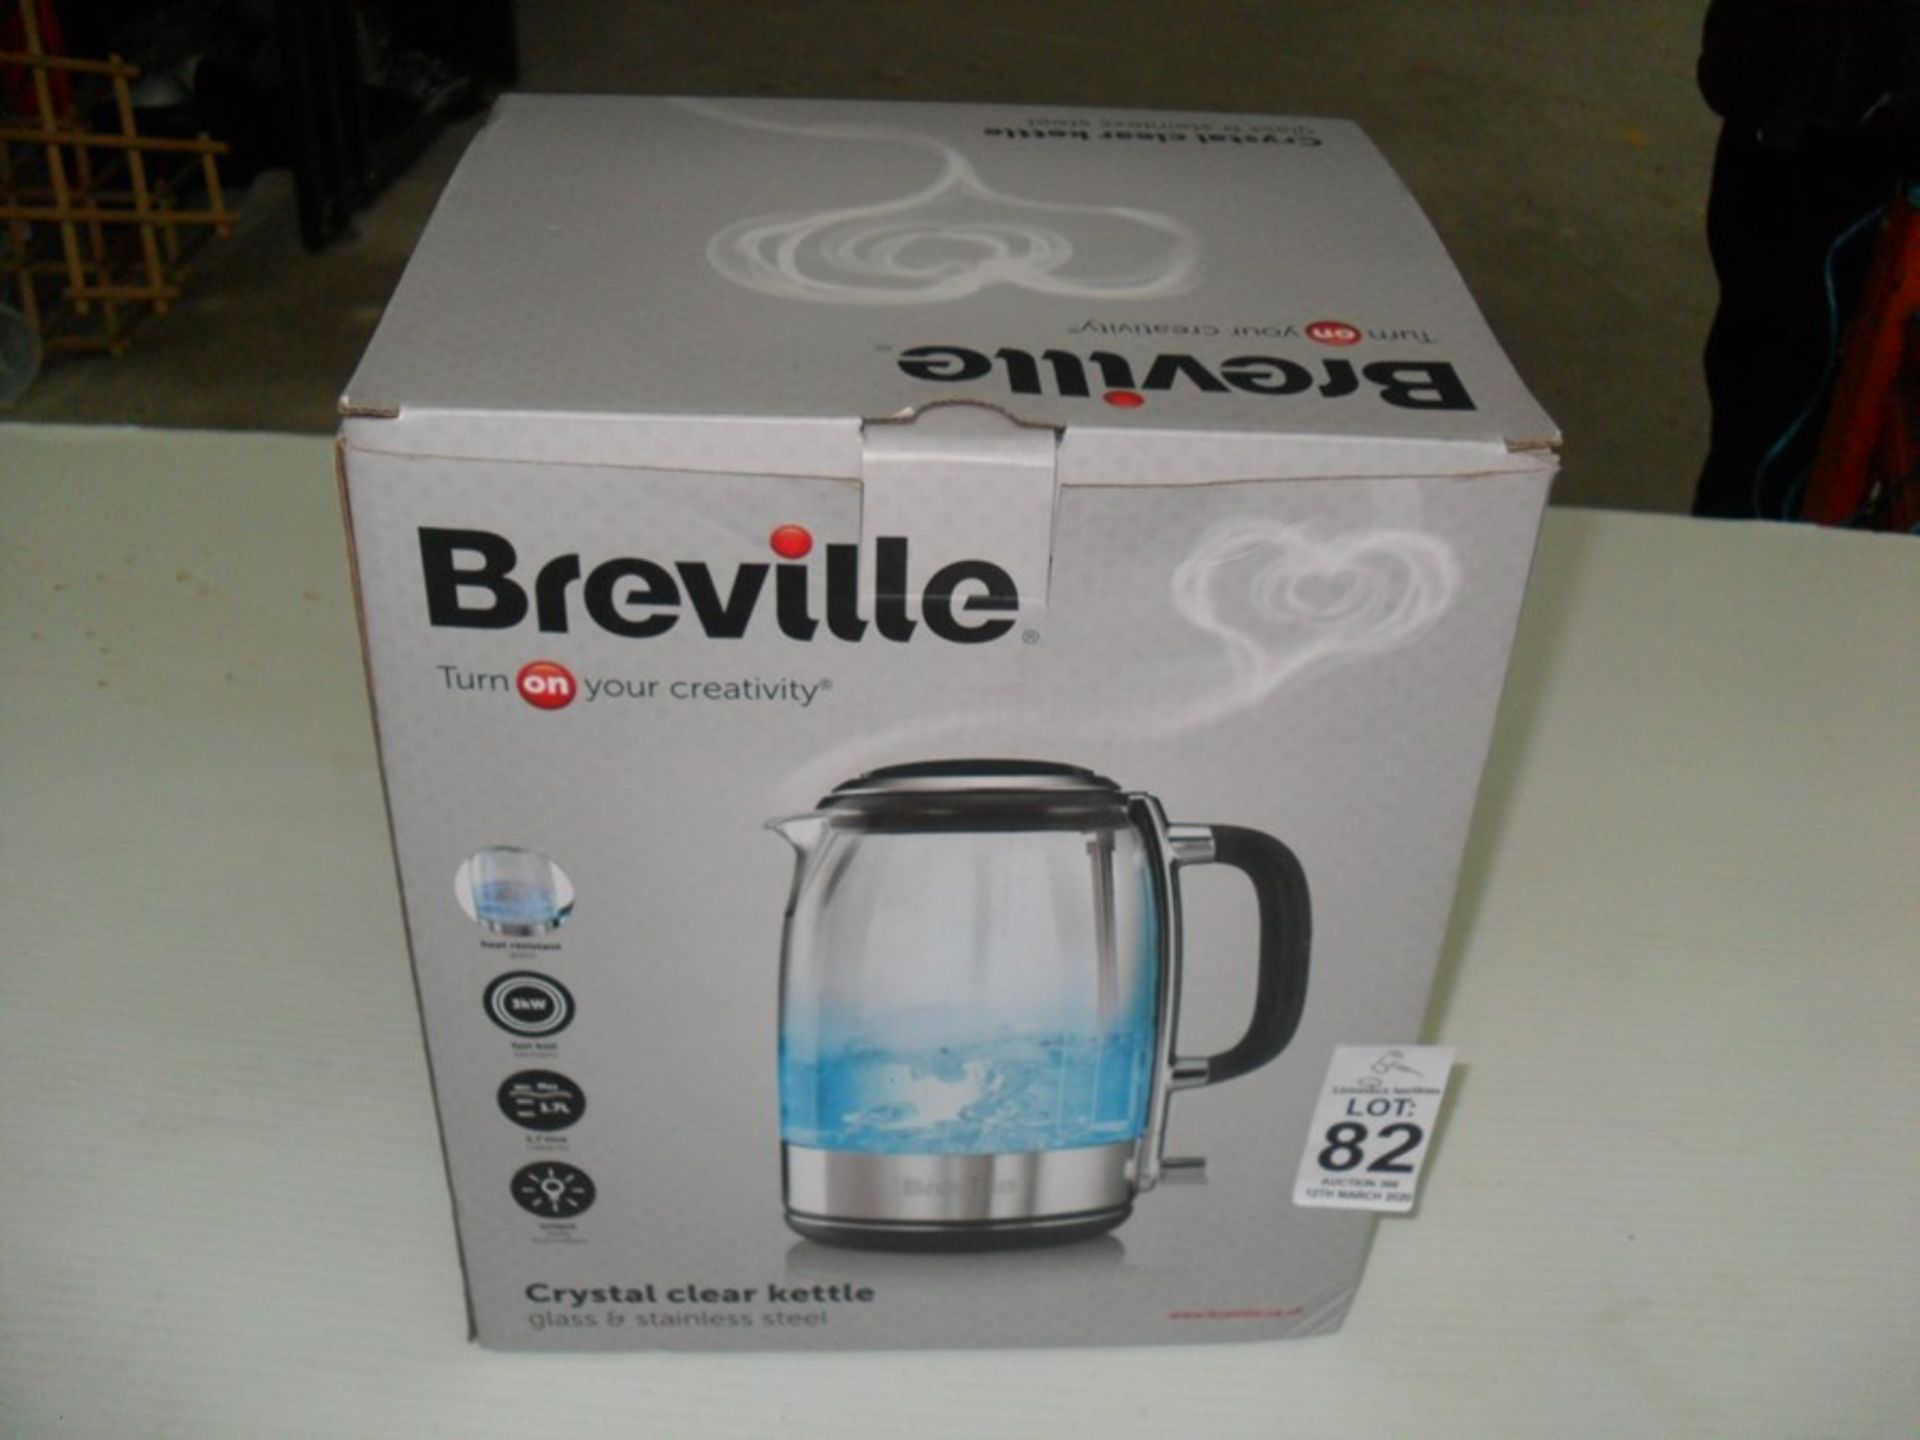 BREVILLE CRYSTAL CLEAR KETTLE (SHOP CLEARANCE)